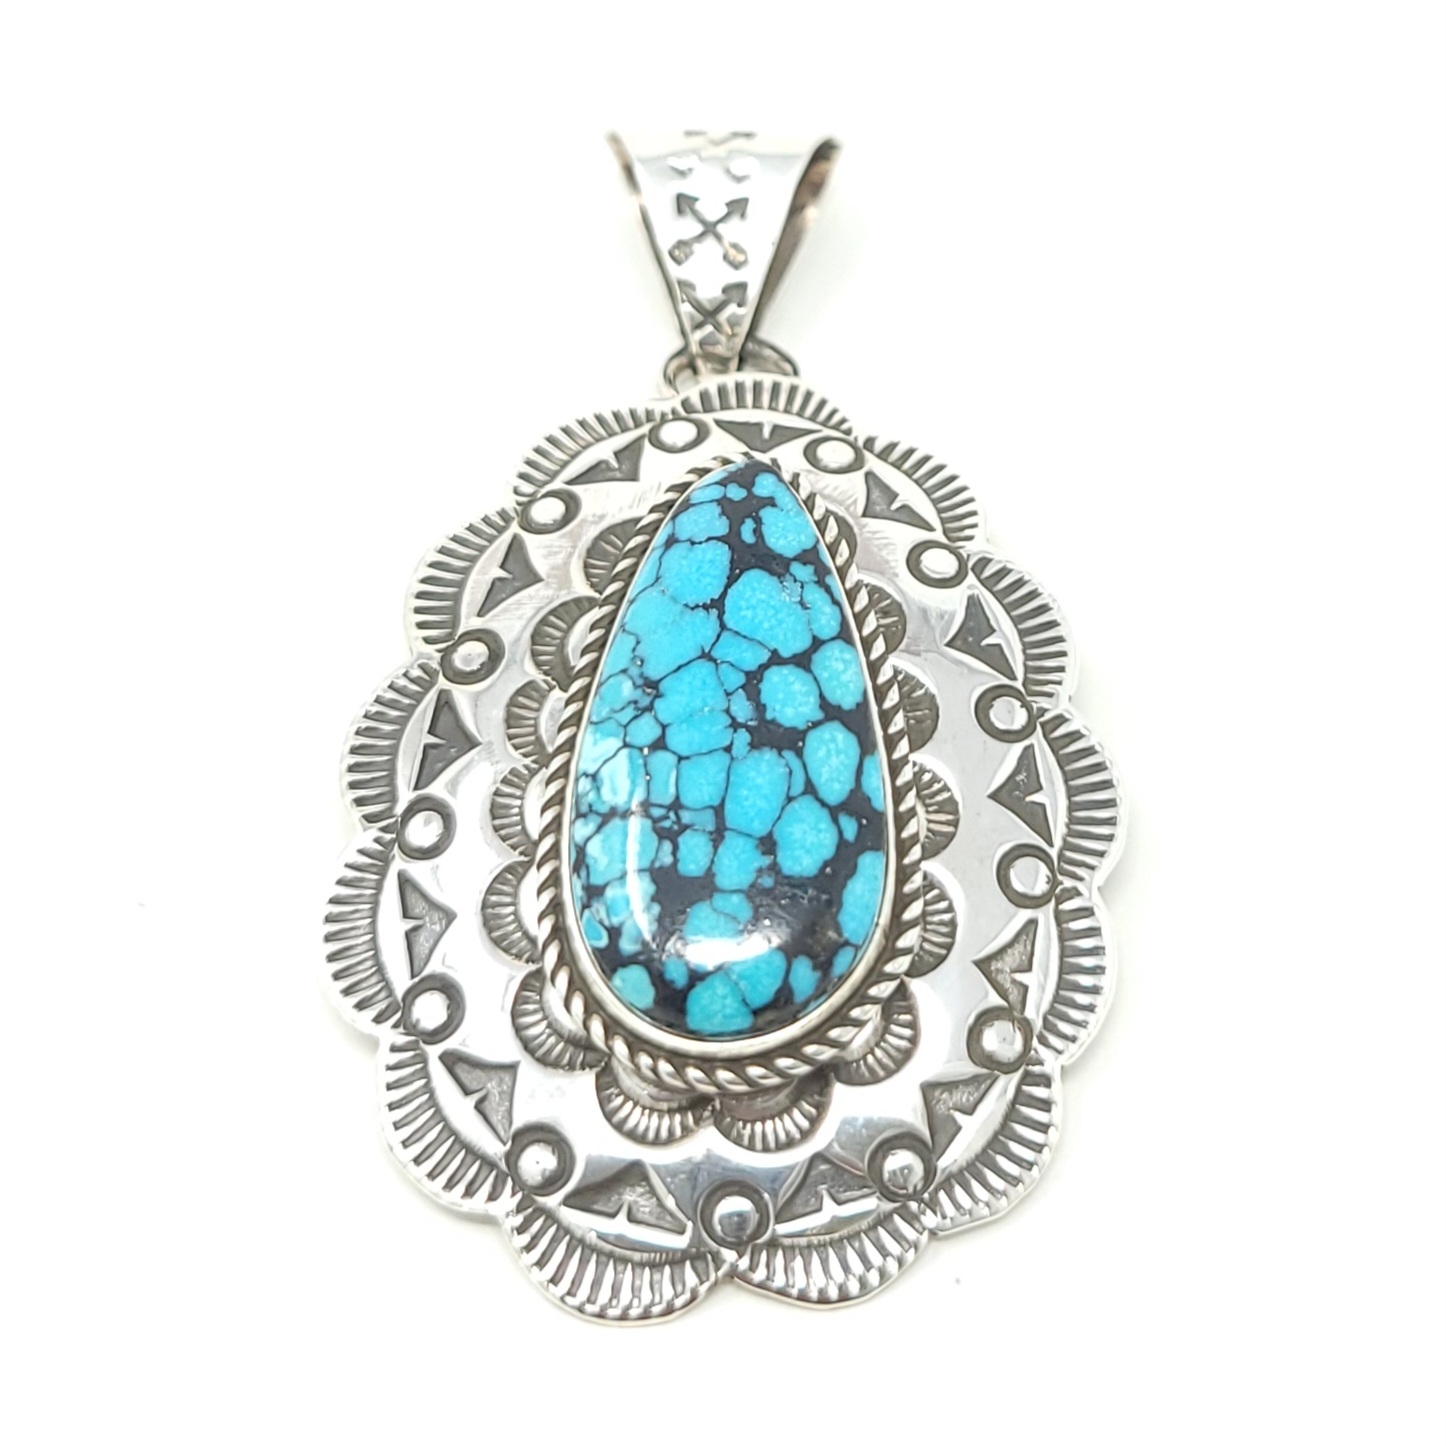 Adrian Reeves Long Navajo Sterling Silver Concho Pendant Hubei Turquoise